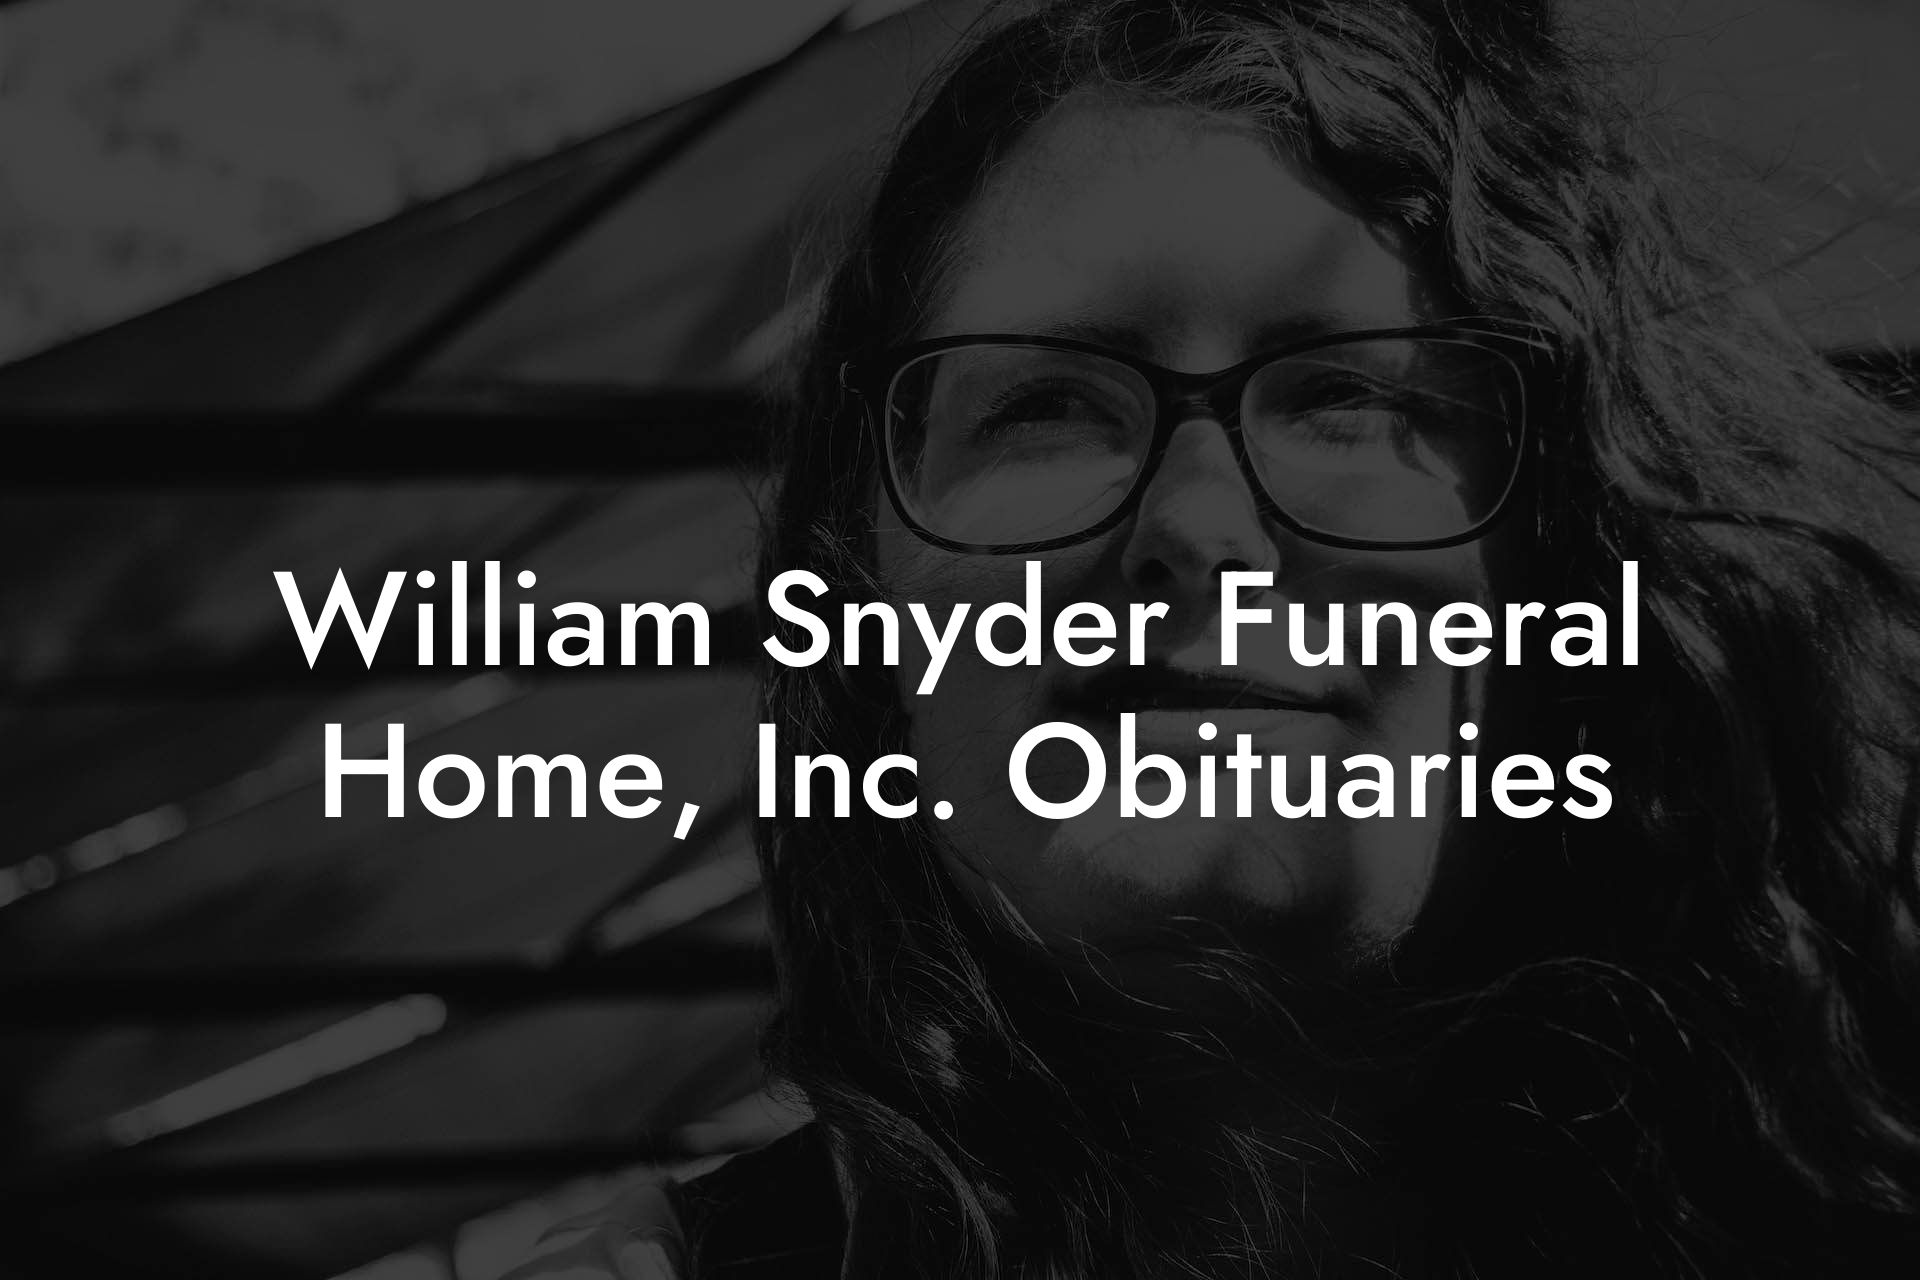 William Snyder Funeral Home, Inc. Obituaries